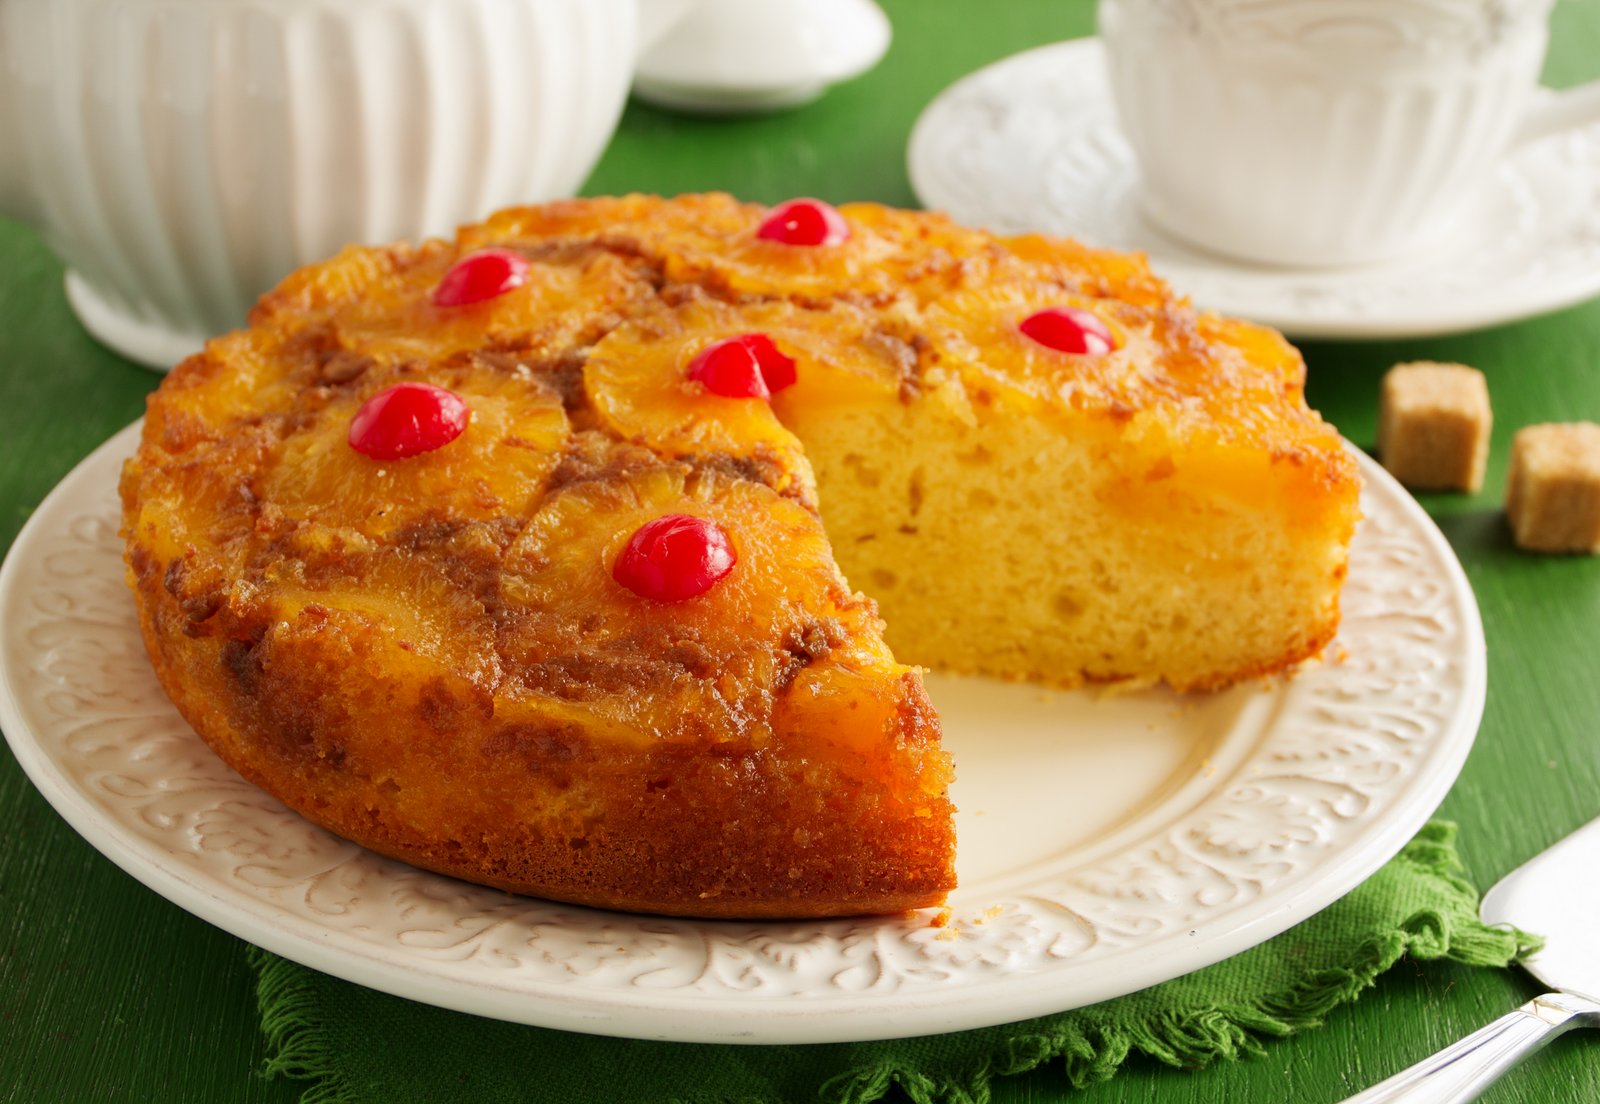 Can I Guess Your Age by How You Rate Old-School Dishes? Quiz Pineapple upside down cake